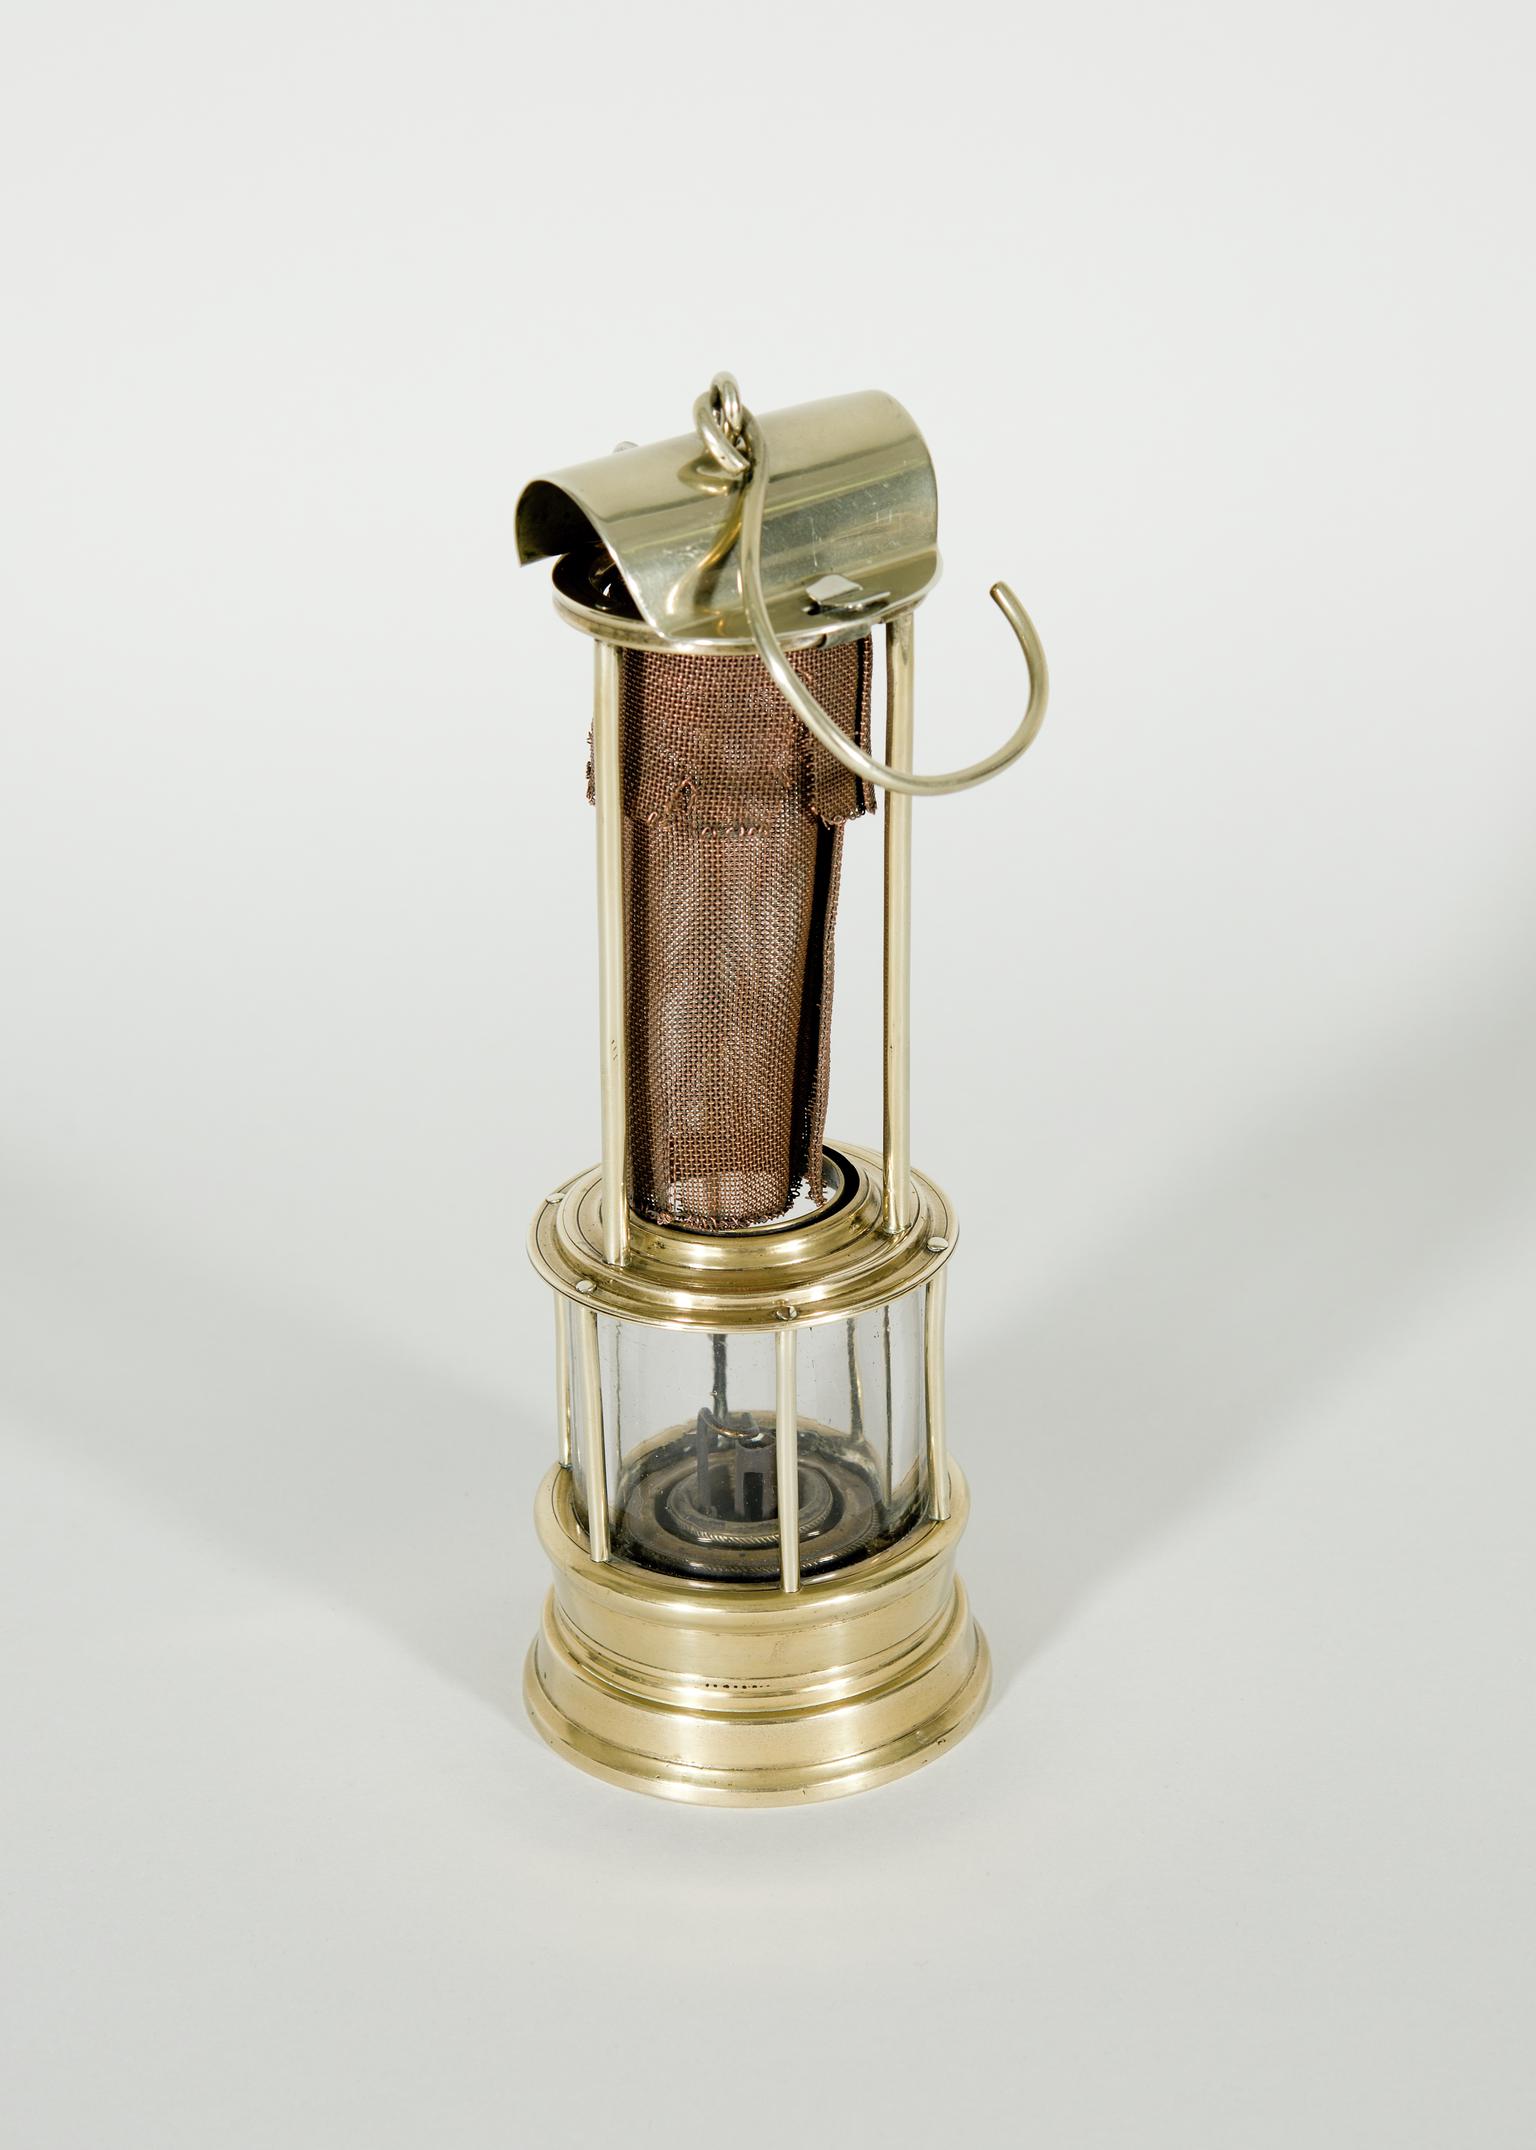 Unbonneted Clanny flame safety lamp